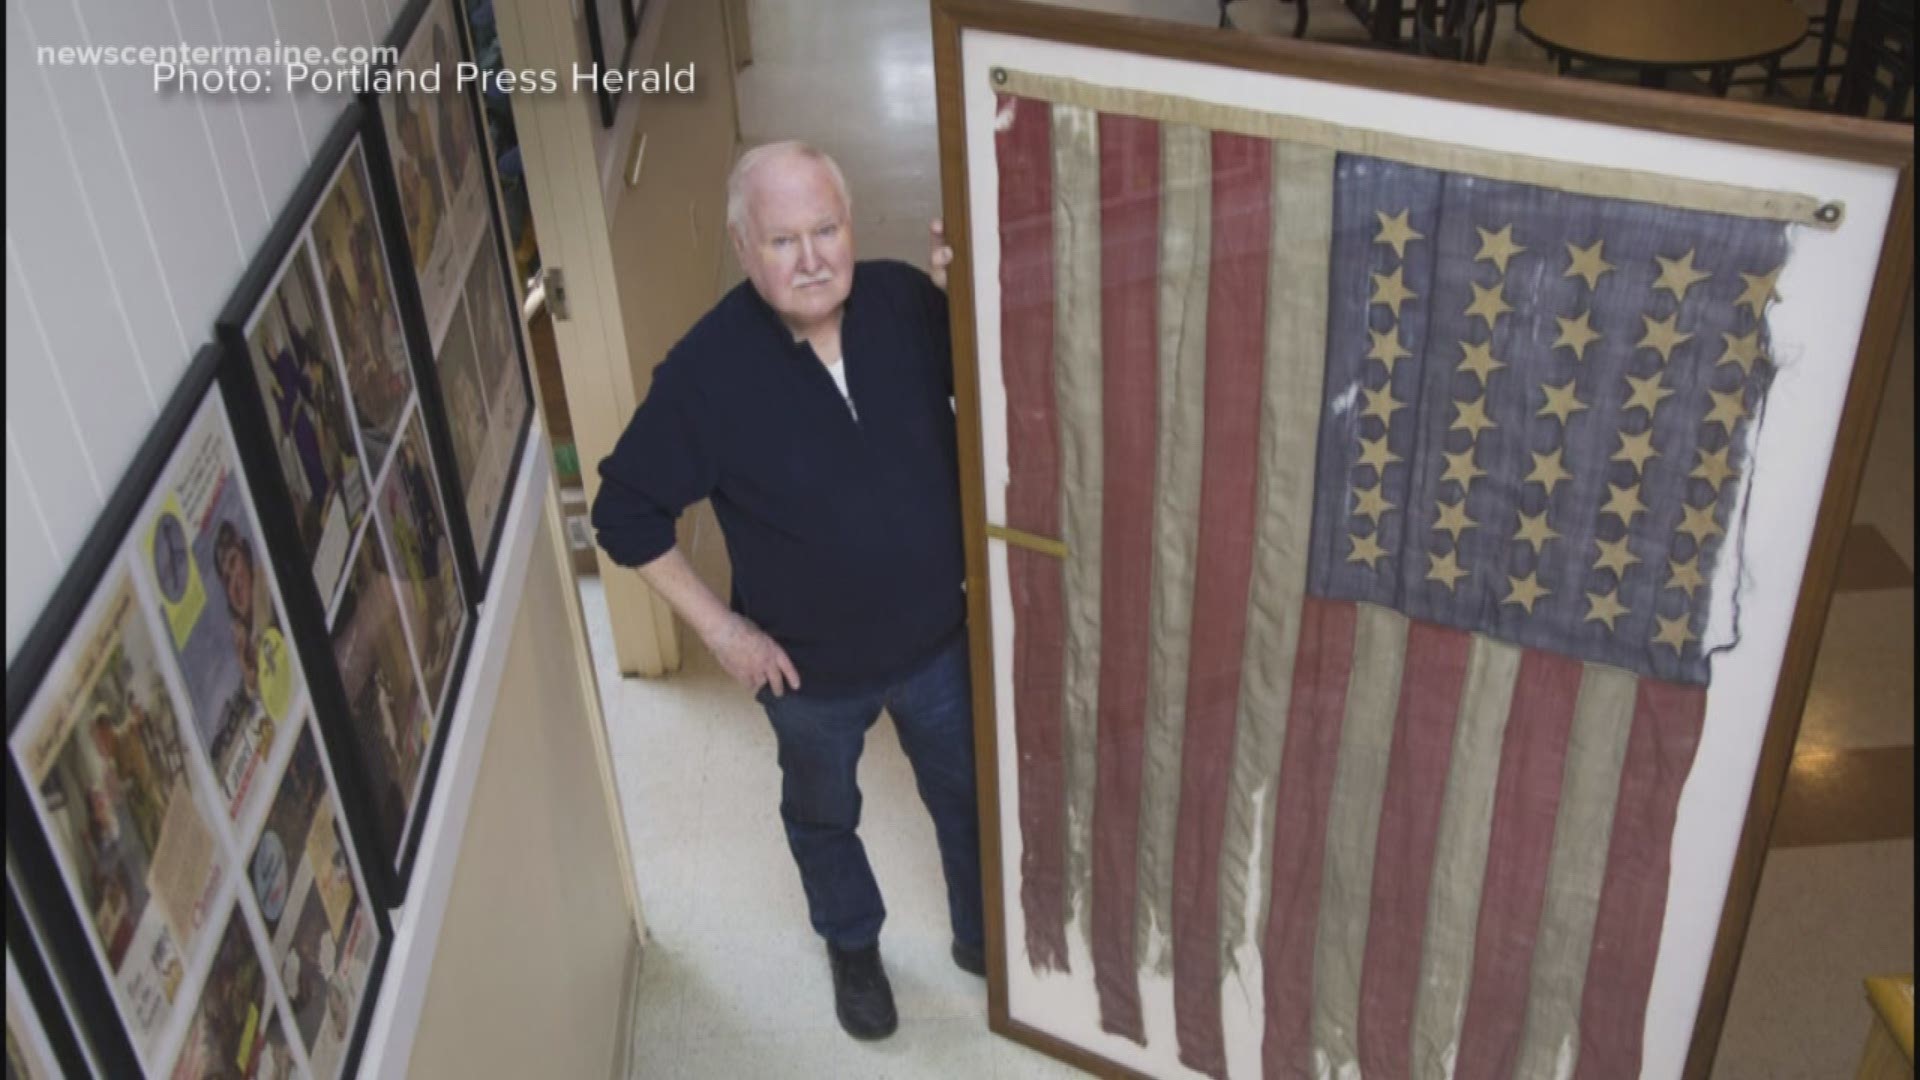 A flag carried by a Maine regiment in the Civil War will be on display at the Maine Military Museum in South Portland.